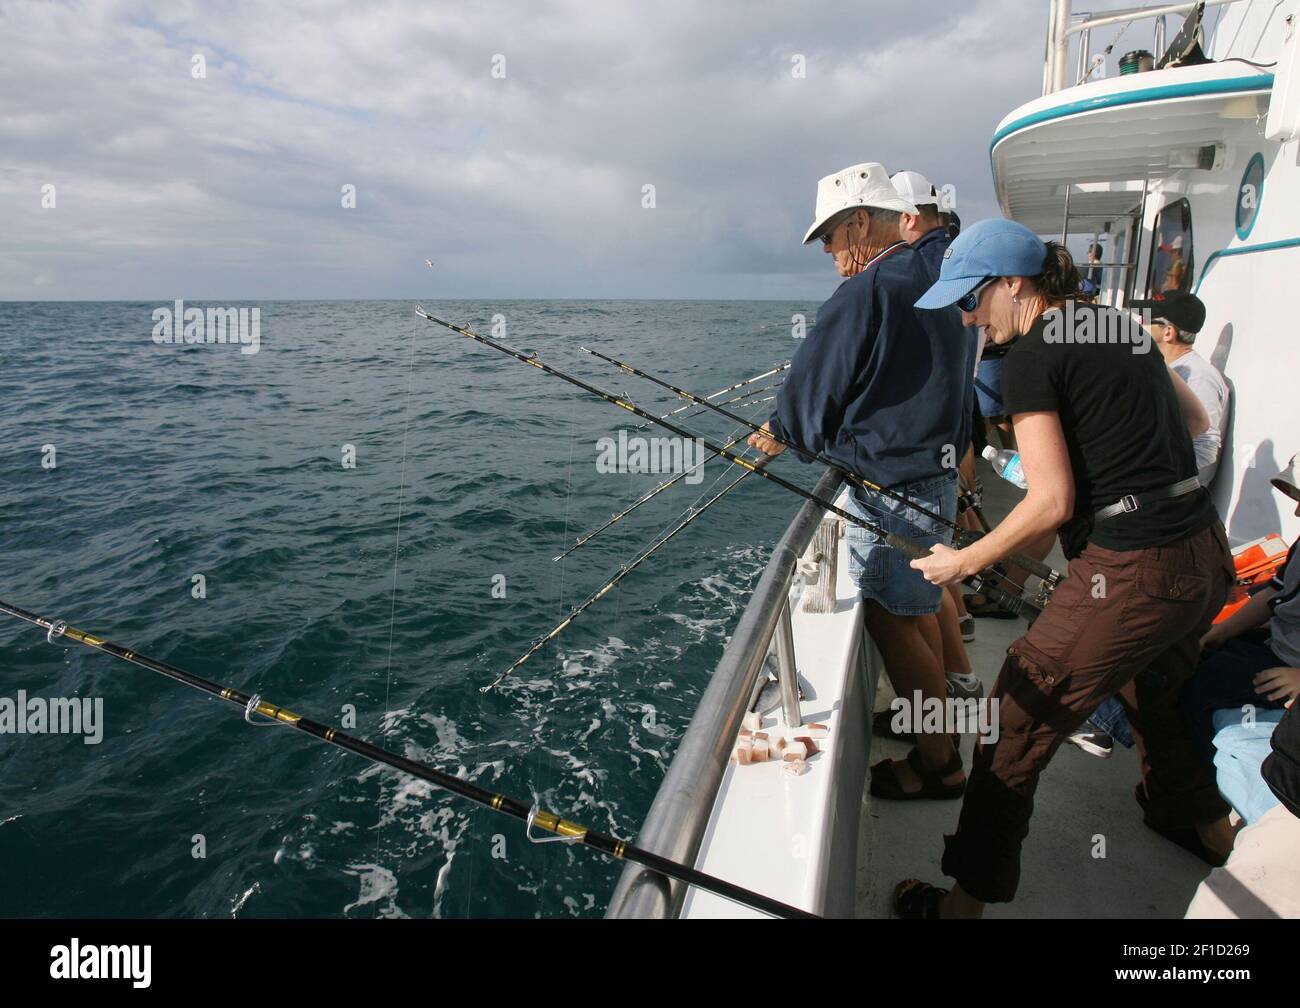 People deep-sea fish in the Atlantic Ocean, March 19, 2009 on the